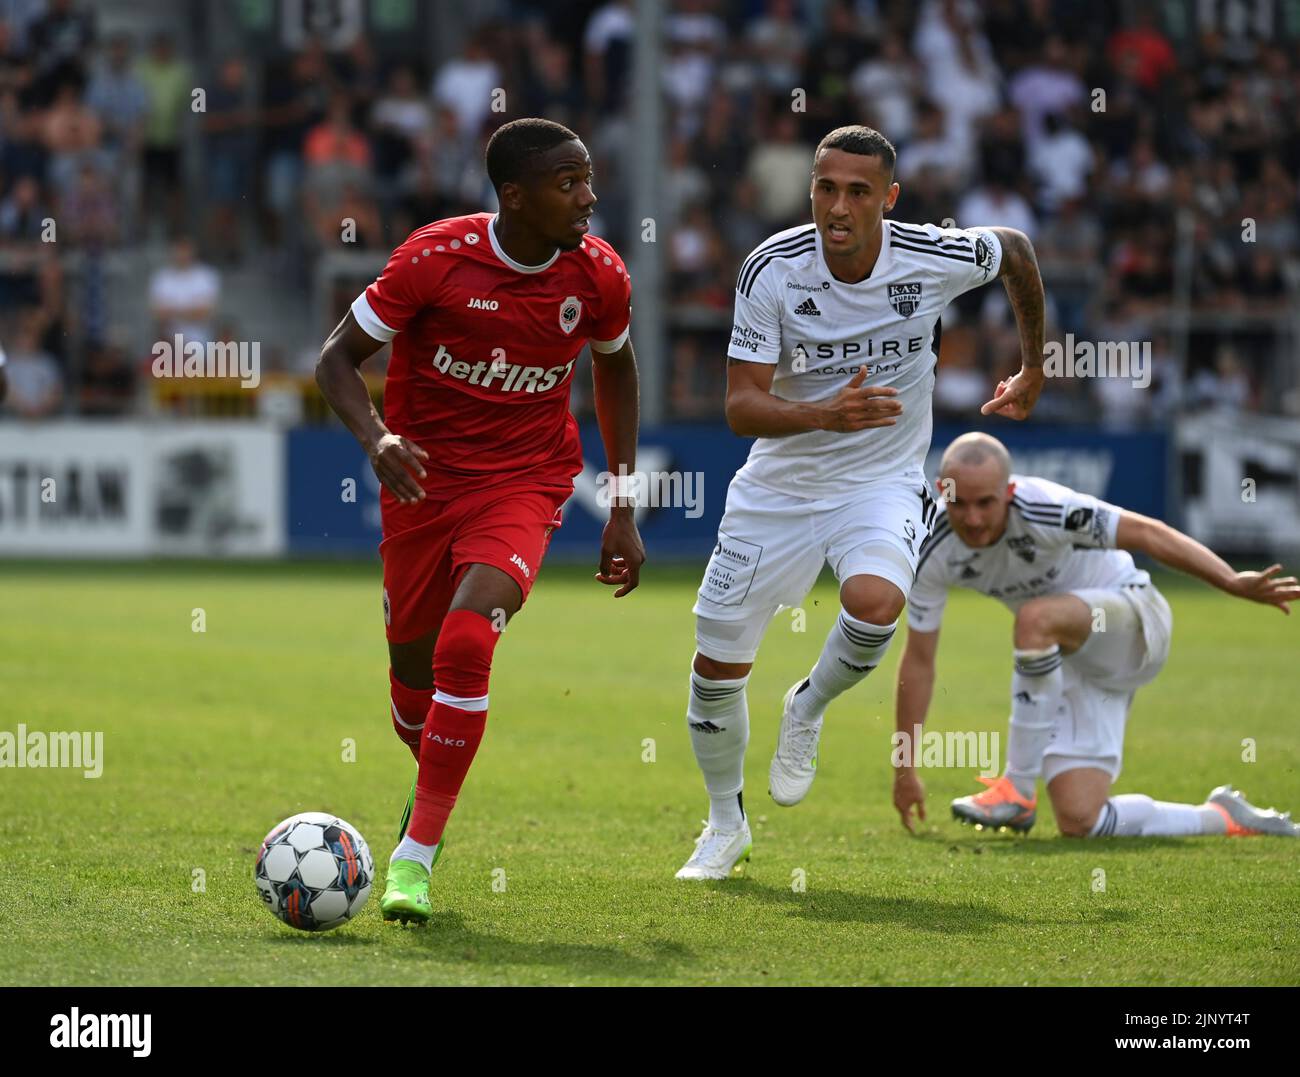 Antwerp's Michel Ange Balikwisha controls the ball during a soccer match between KAS Eupen and Royal Antwerp FC RAFC, Sunday 14 August 2022 in Eupen, on day 4 of the 2022-2023 'Jupiler Pro League' first division of the Belgian championship. BELGA PHOTO JOHN THYS Stock Photo